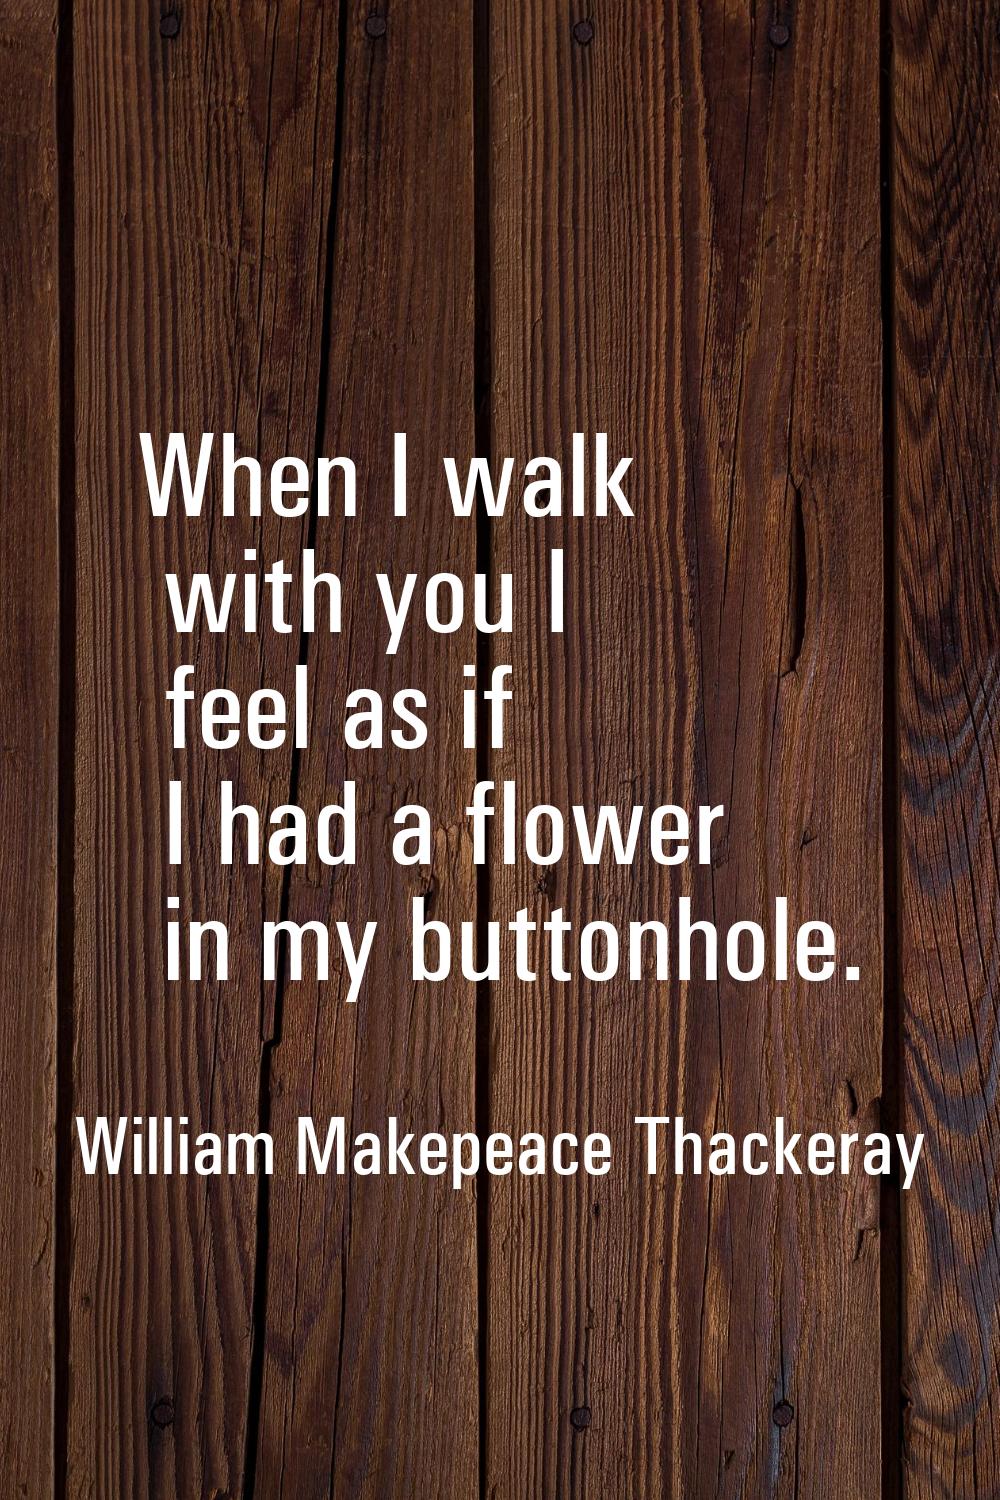 When I walk with you I feel as if I had a flower in my buttonhole.